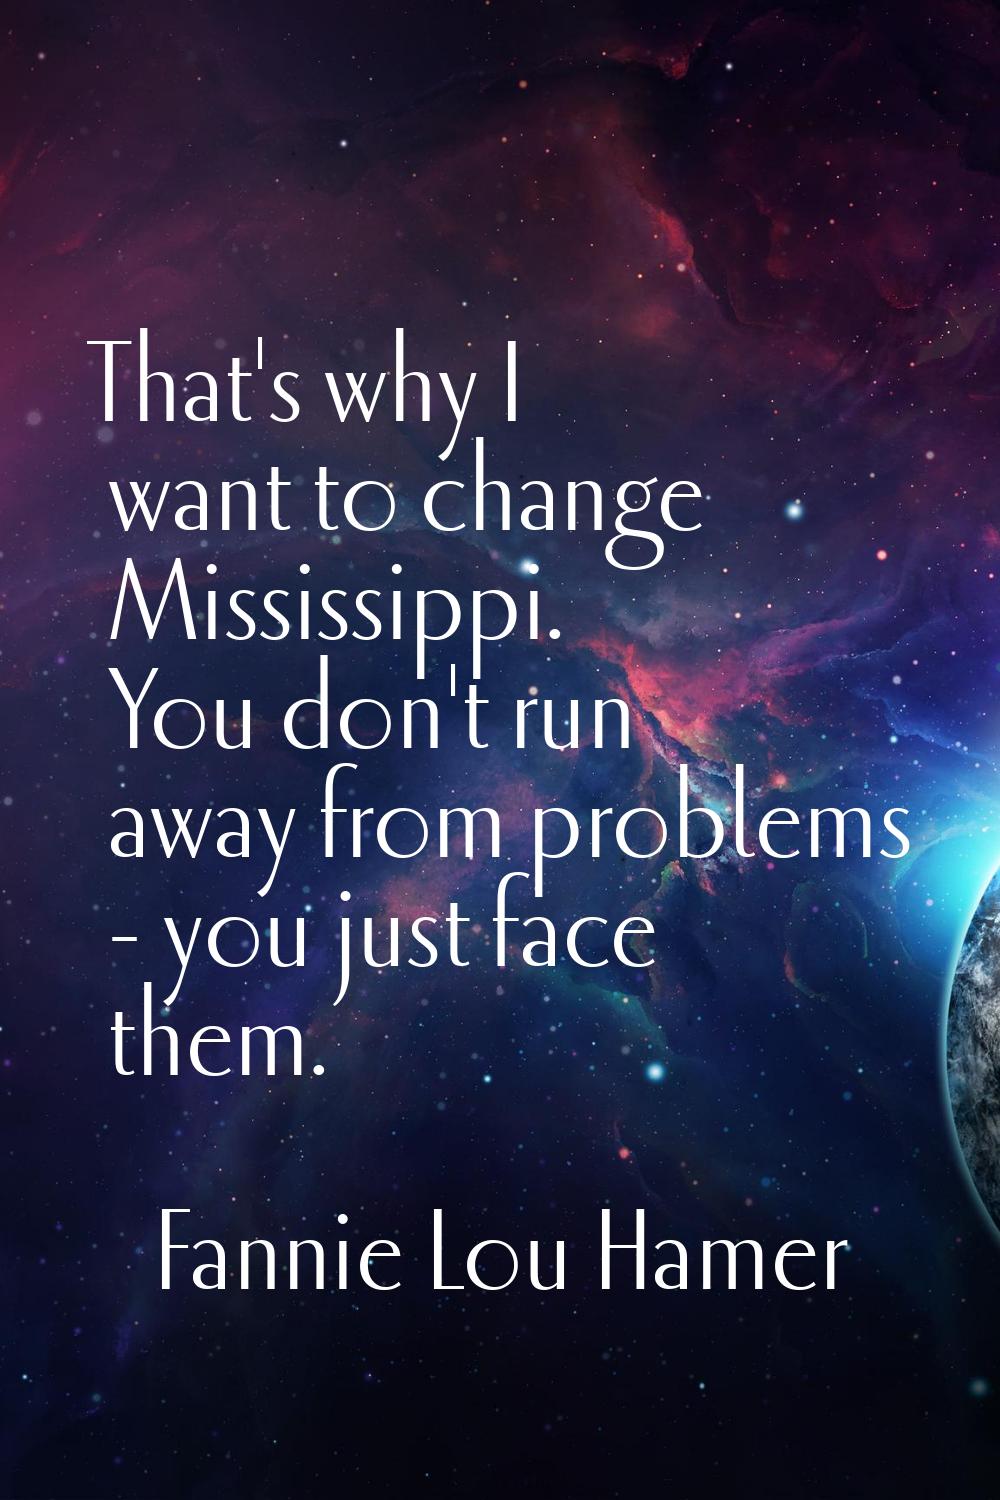 That's why I want to change Mississippi. You don't run away from problems - you just face them.